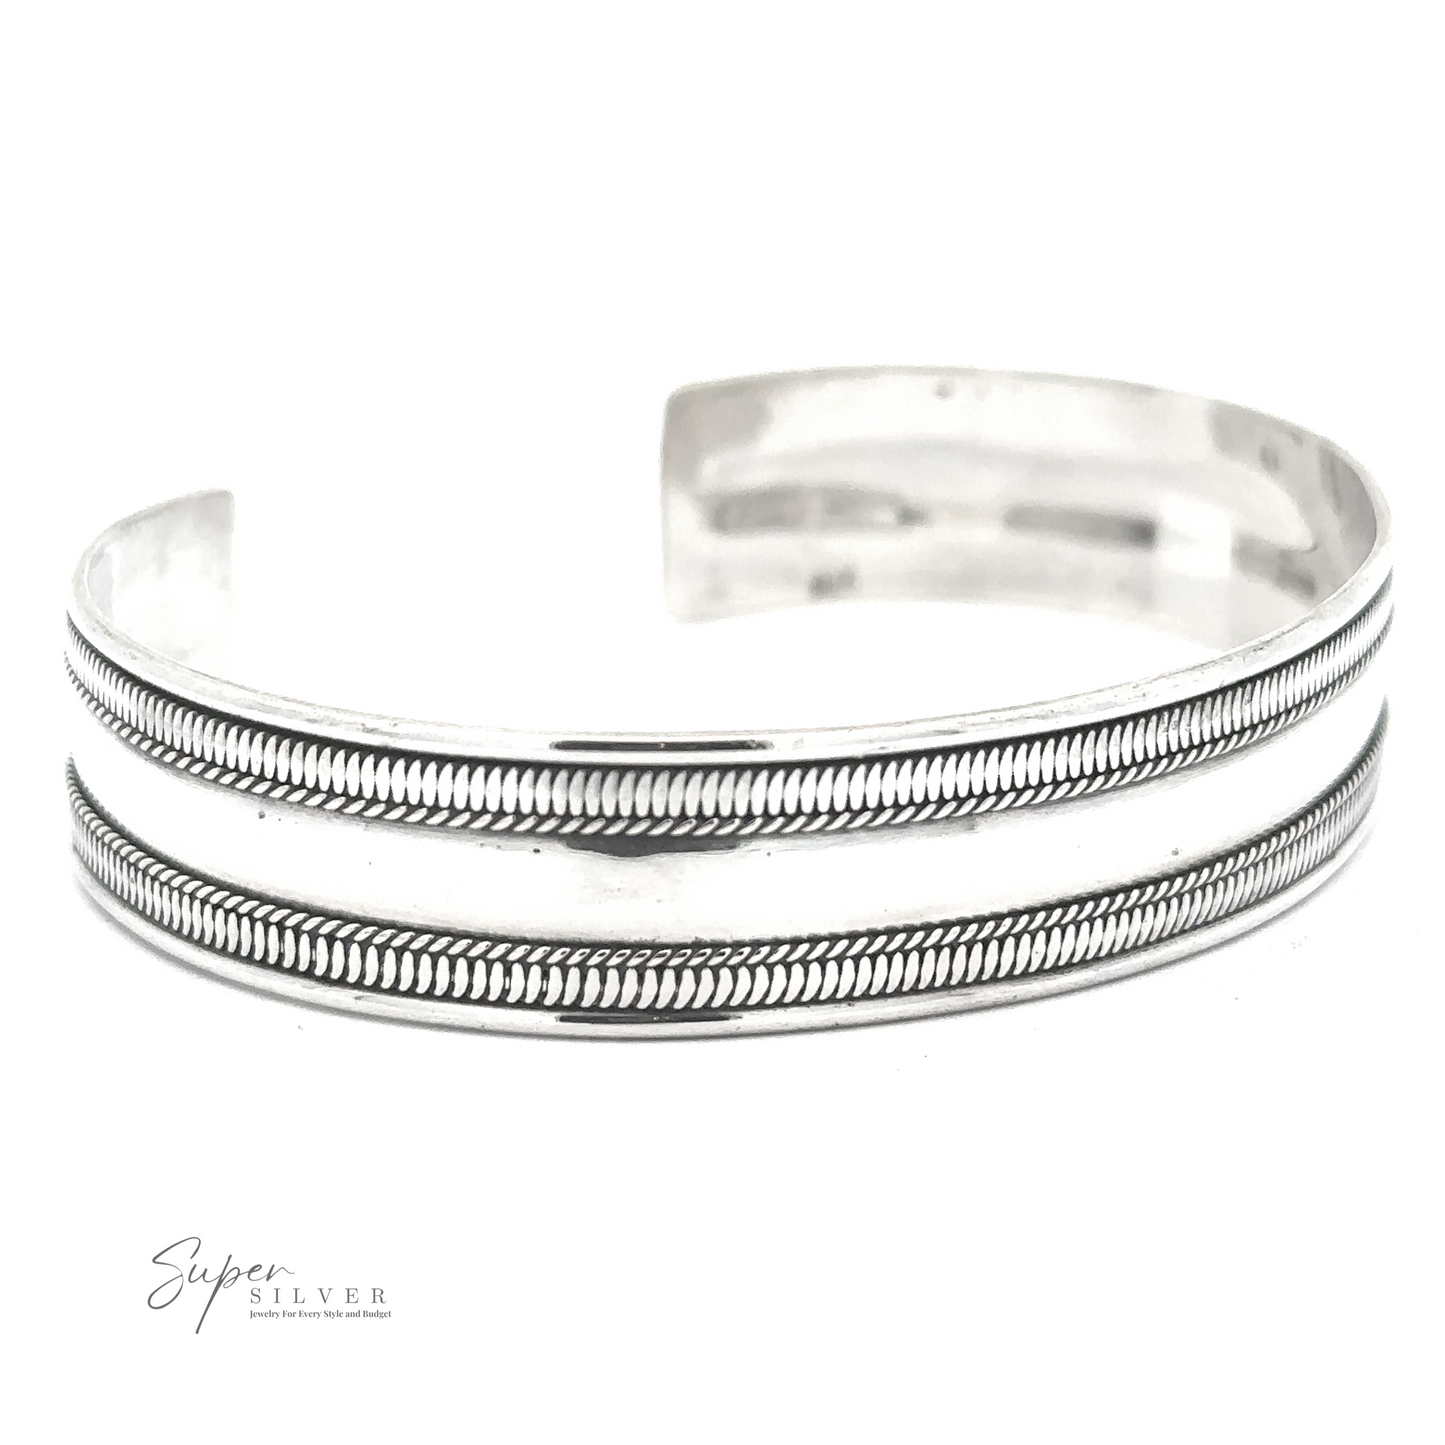 
                  
                    A Silver Cuff Bracelet with two parallel etched lines and a subtle pattern between them, labeled "Super Silver" in the bottom left corner. This adjustable size piece combines elegance with versatility.
                  
                